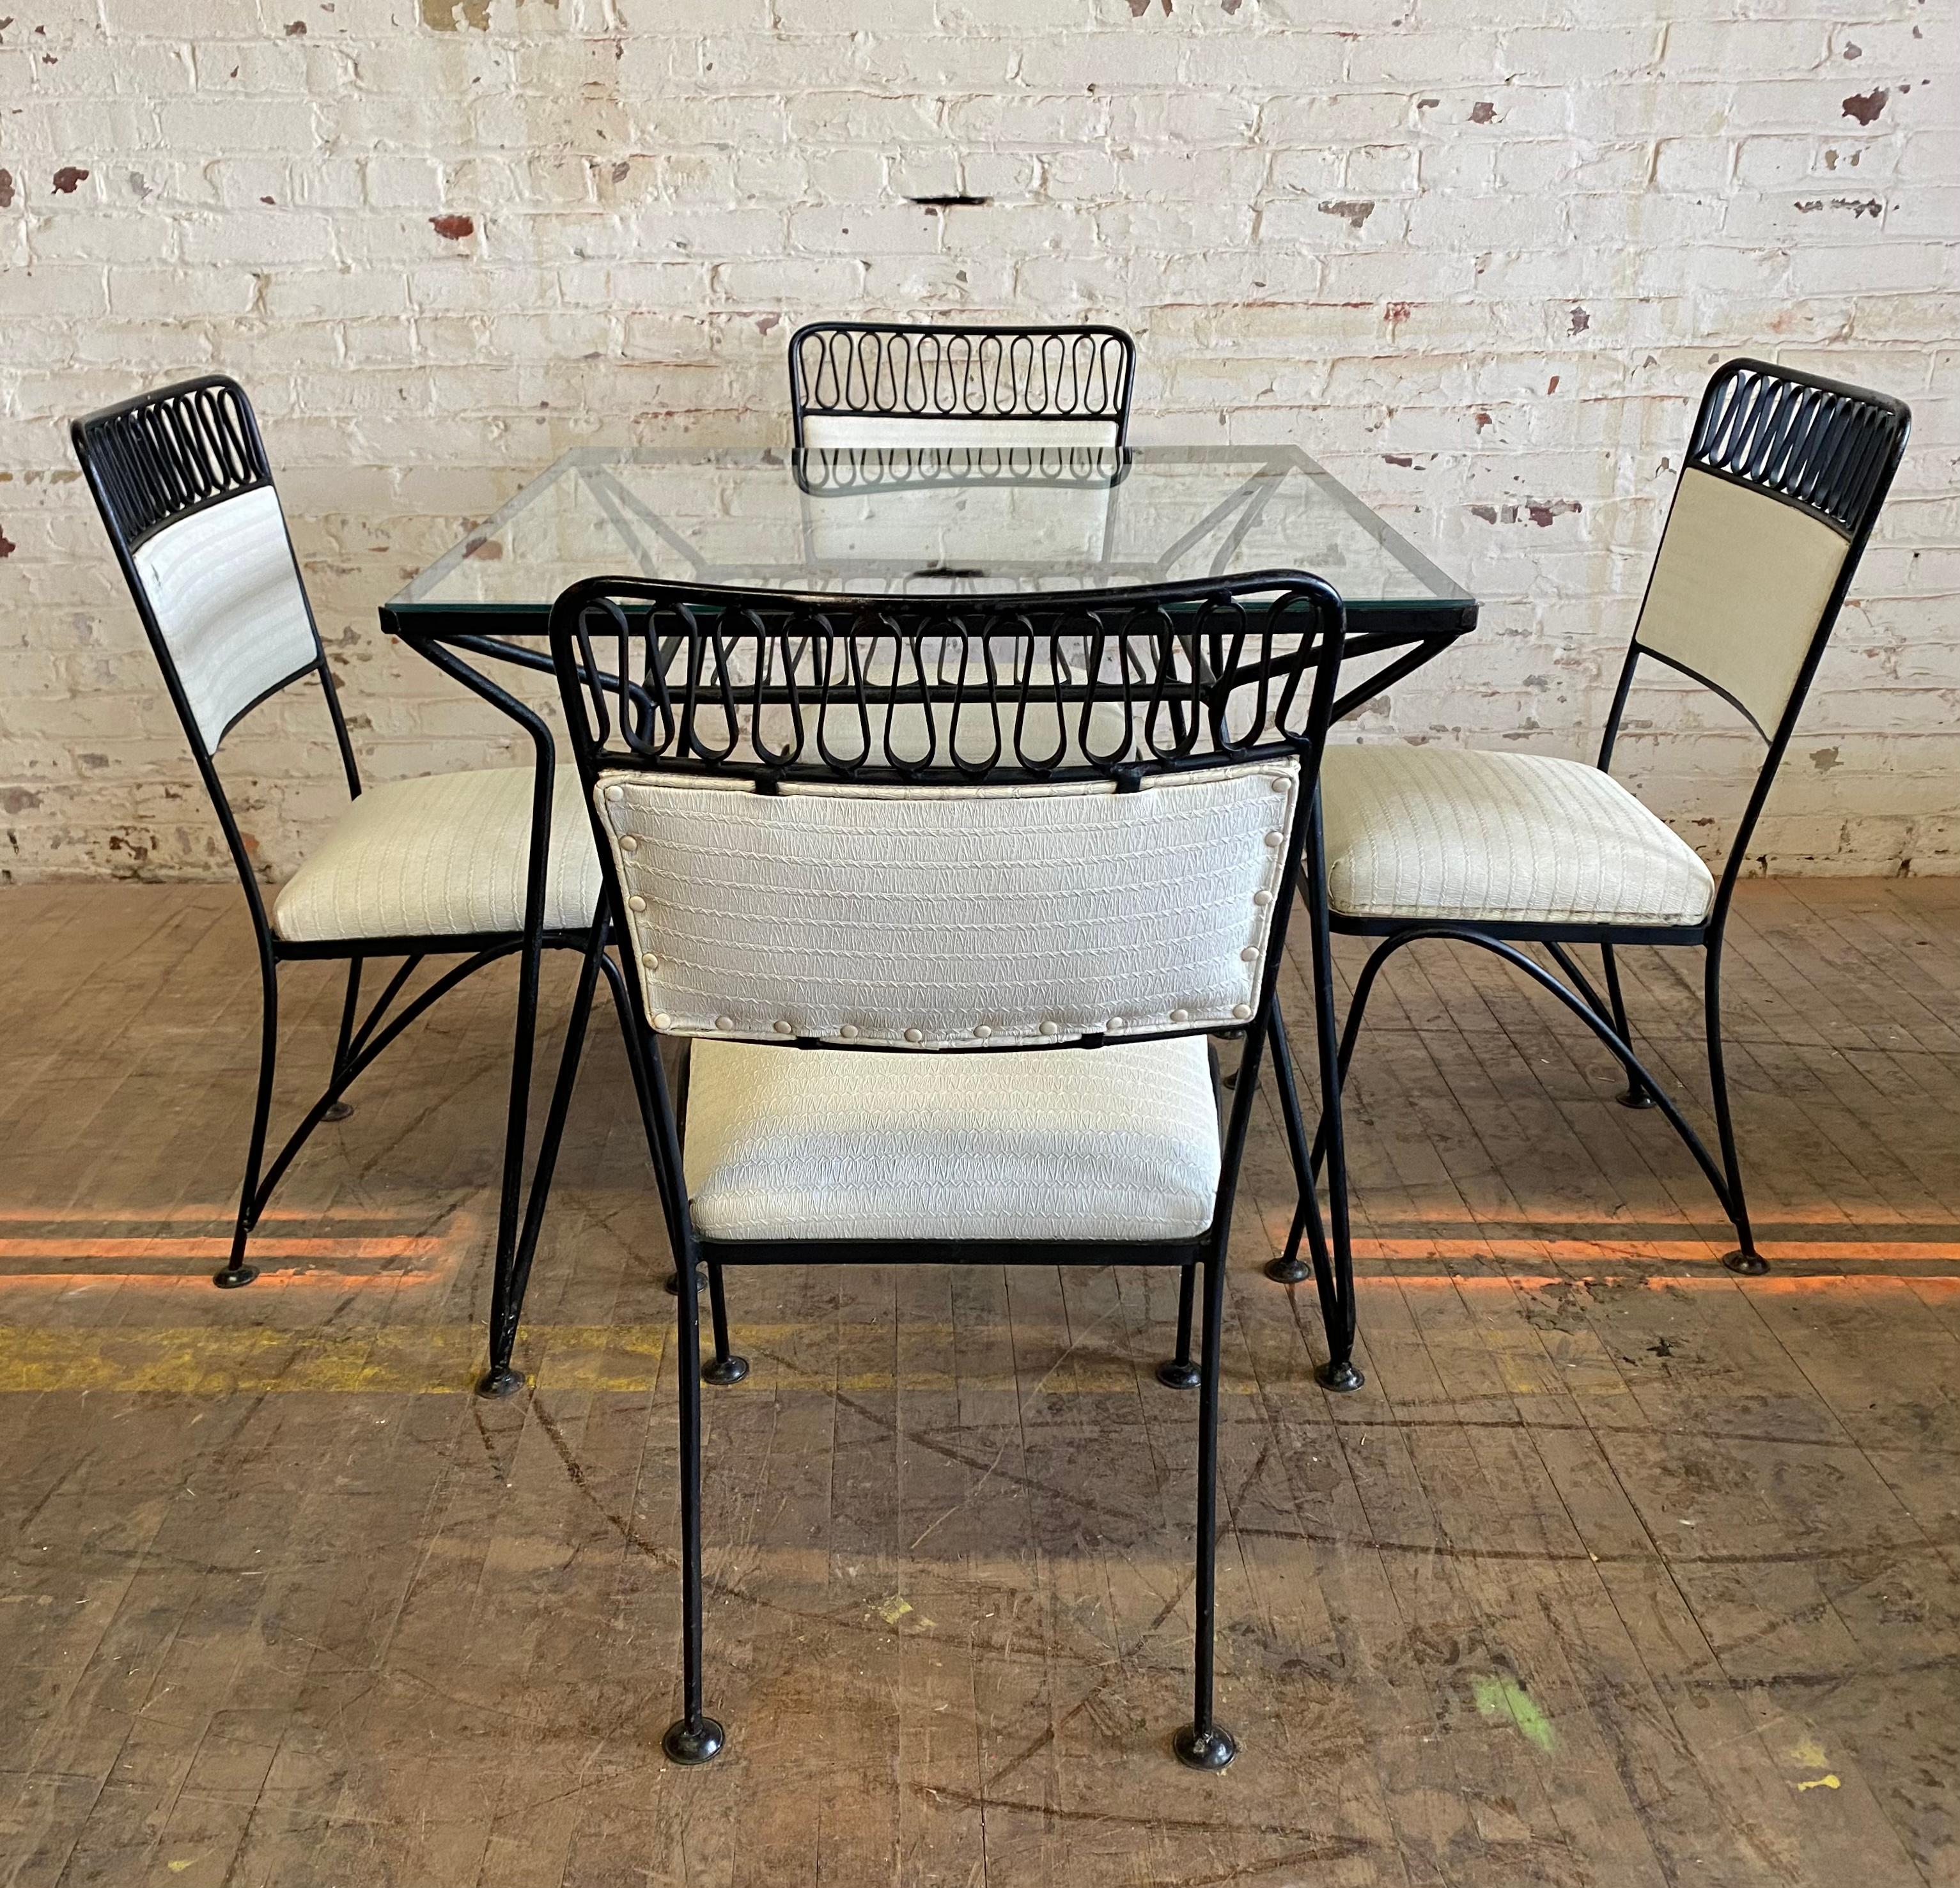 Wonderful Indoor / outdoor Iron Dinette set, table and 4 chairs attributed to John Salterini, retains original white naugahyde seat and back, great design, great size, hand delivery avail to New York City or anywhere en route from Buffalo NY.